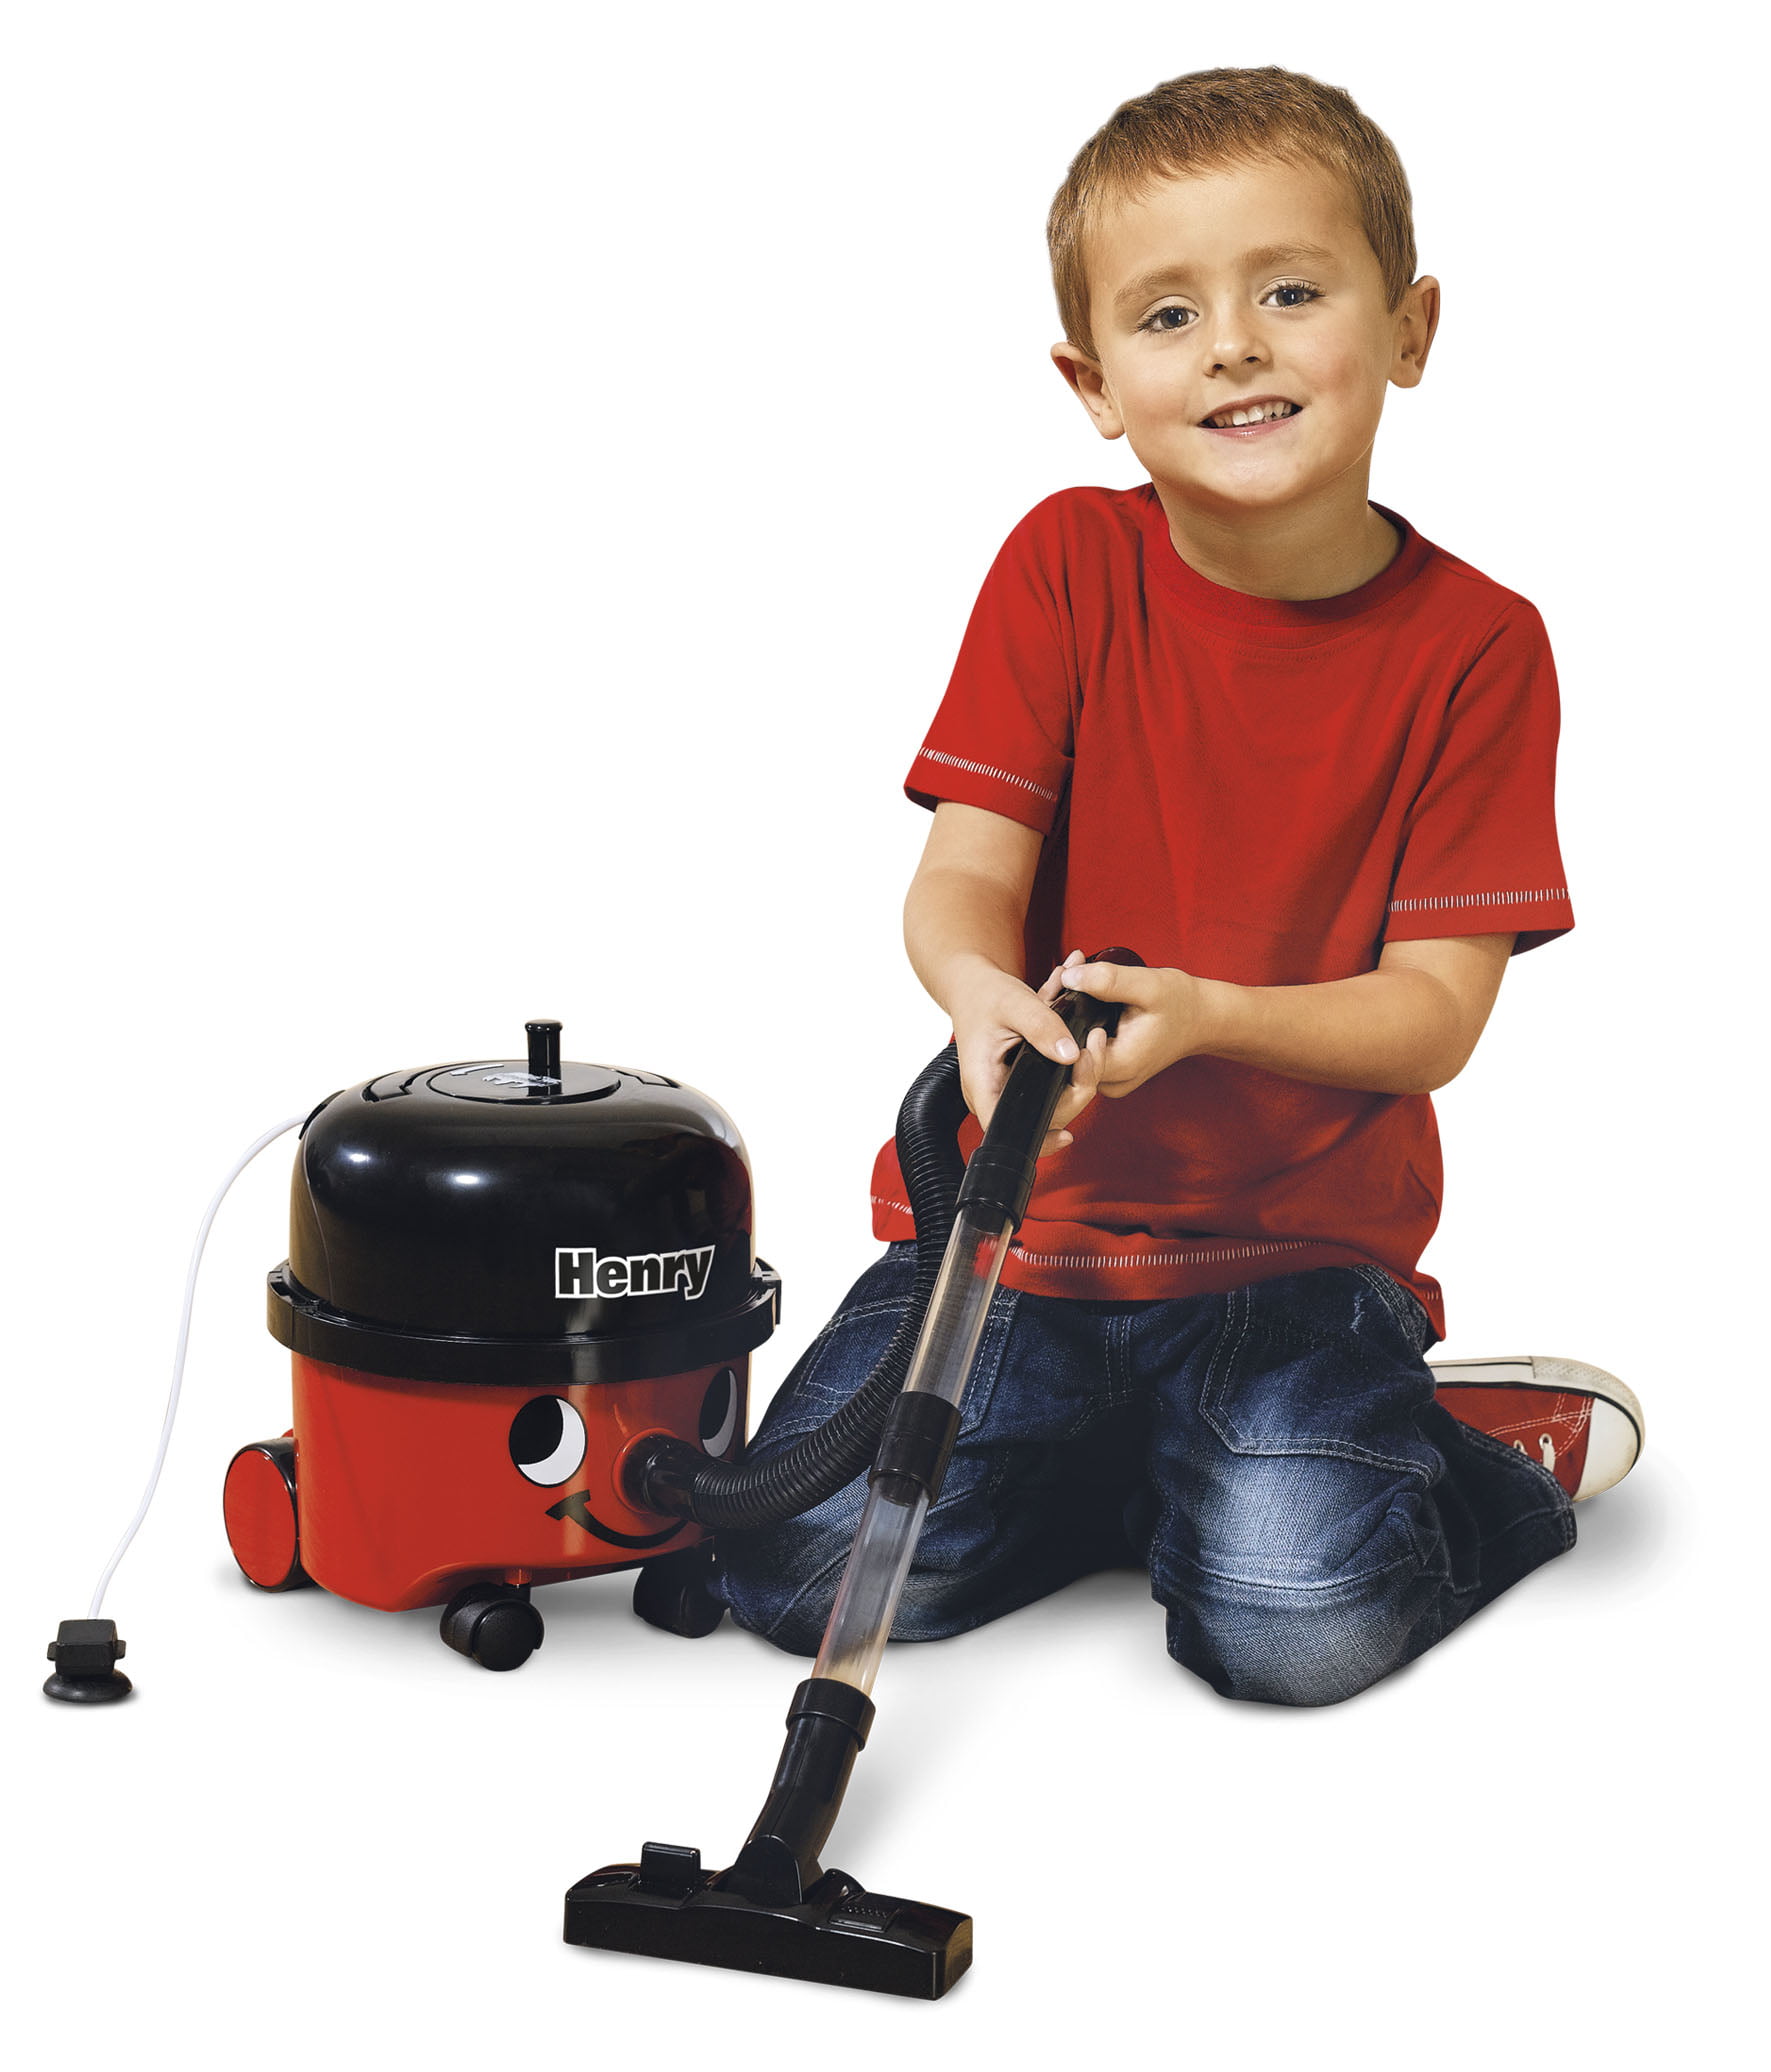 Casdon Henry Vacuum Cleaner Toy Red/Black for sale online 